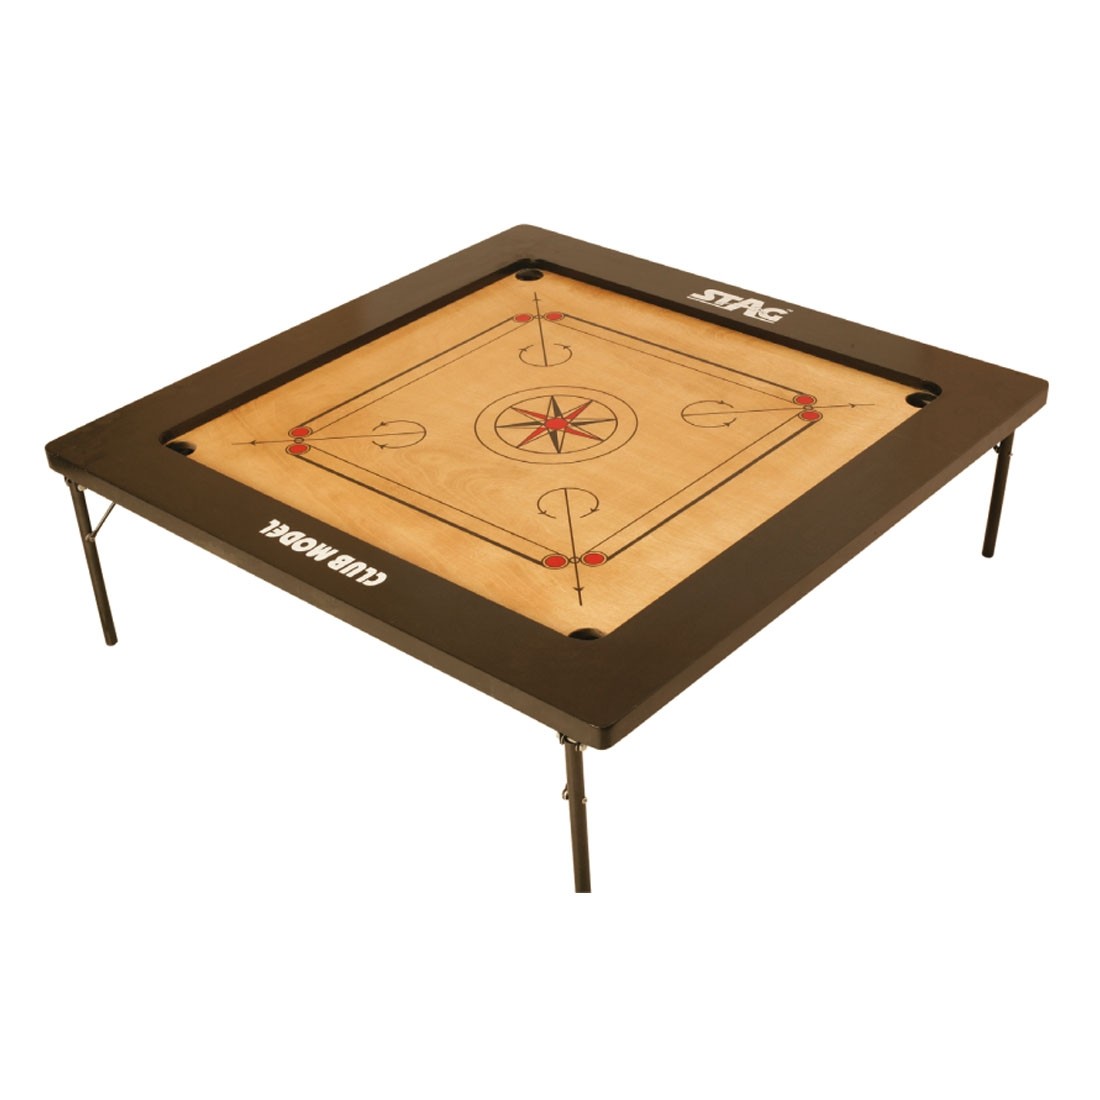 STAG CARROM BOARD HOBBY 1.5" BORDER 3MM M.D.F. WITH WHEELS